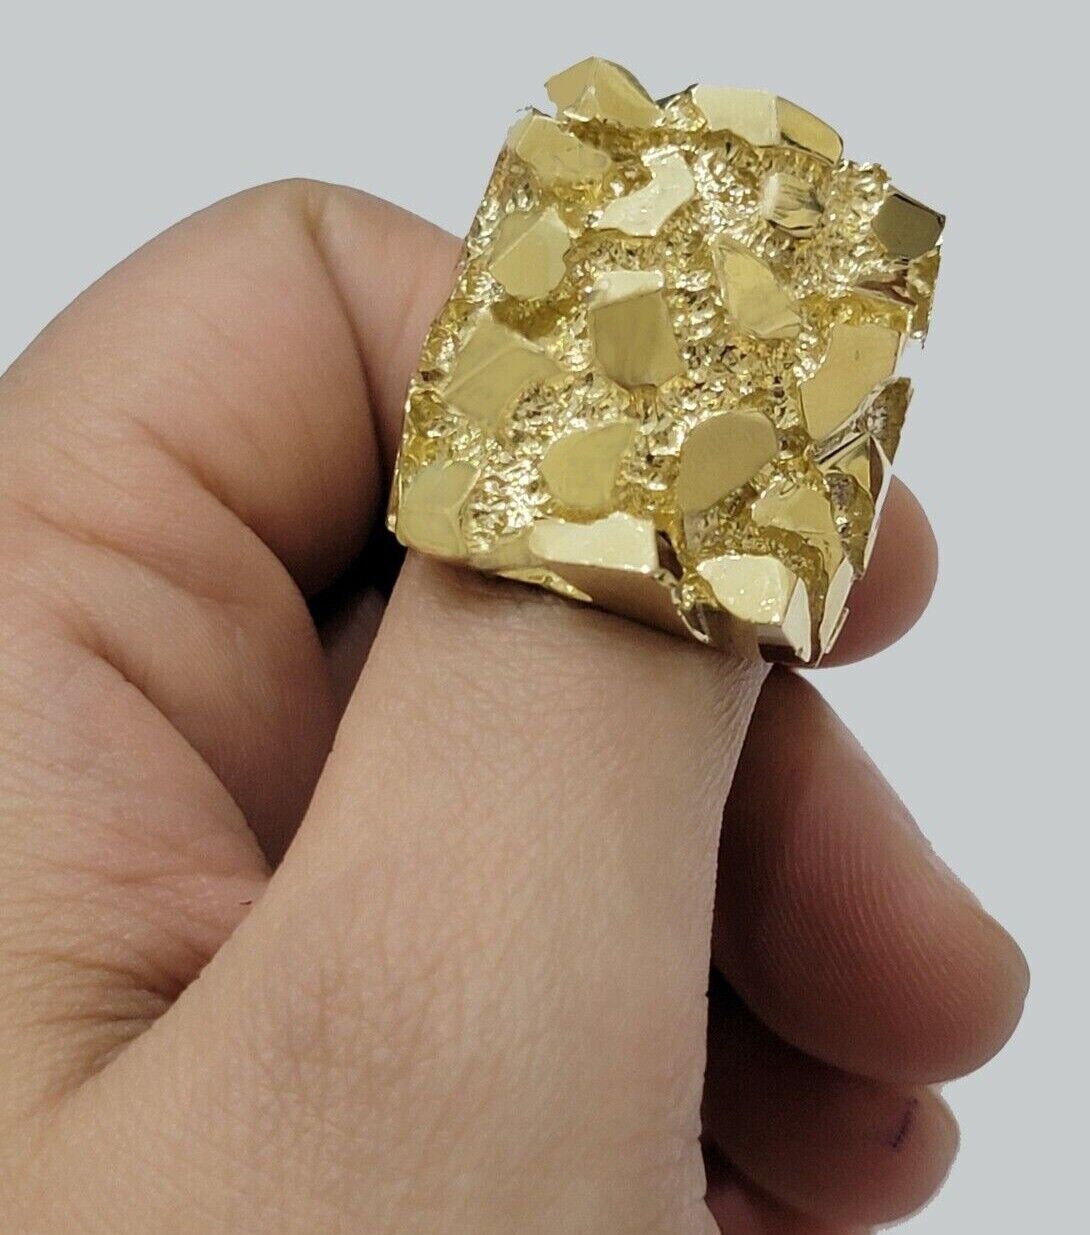 SOLID 10k Yellow Gold Nugget Ring Casual Men's Band Square New Style REAL SALE